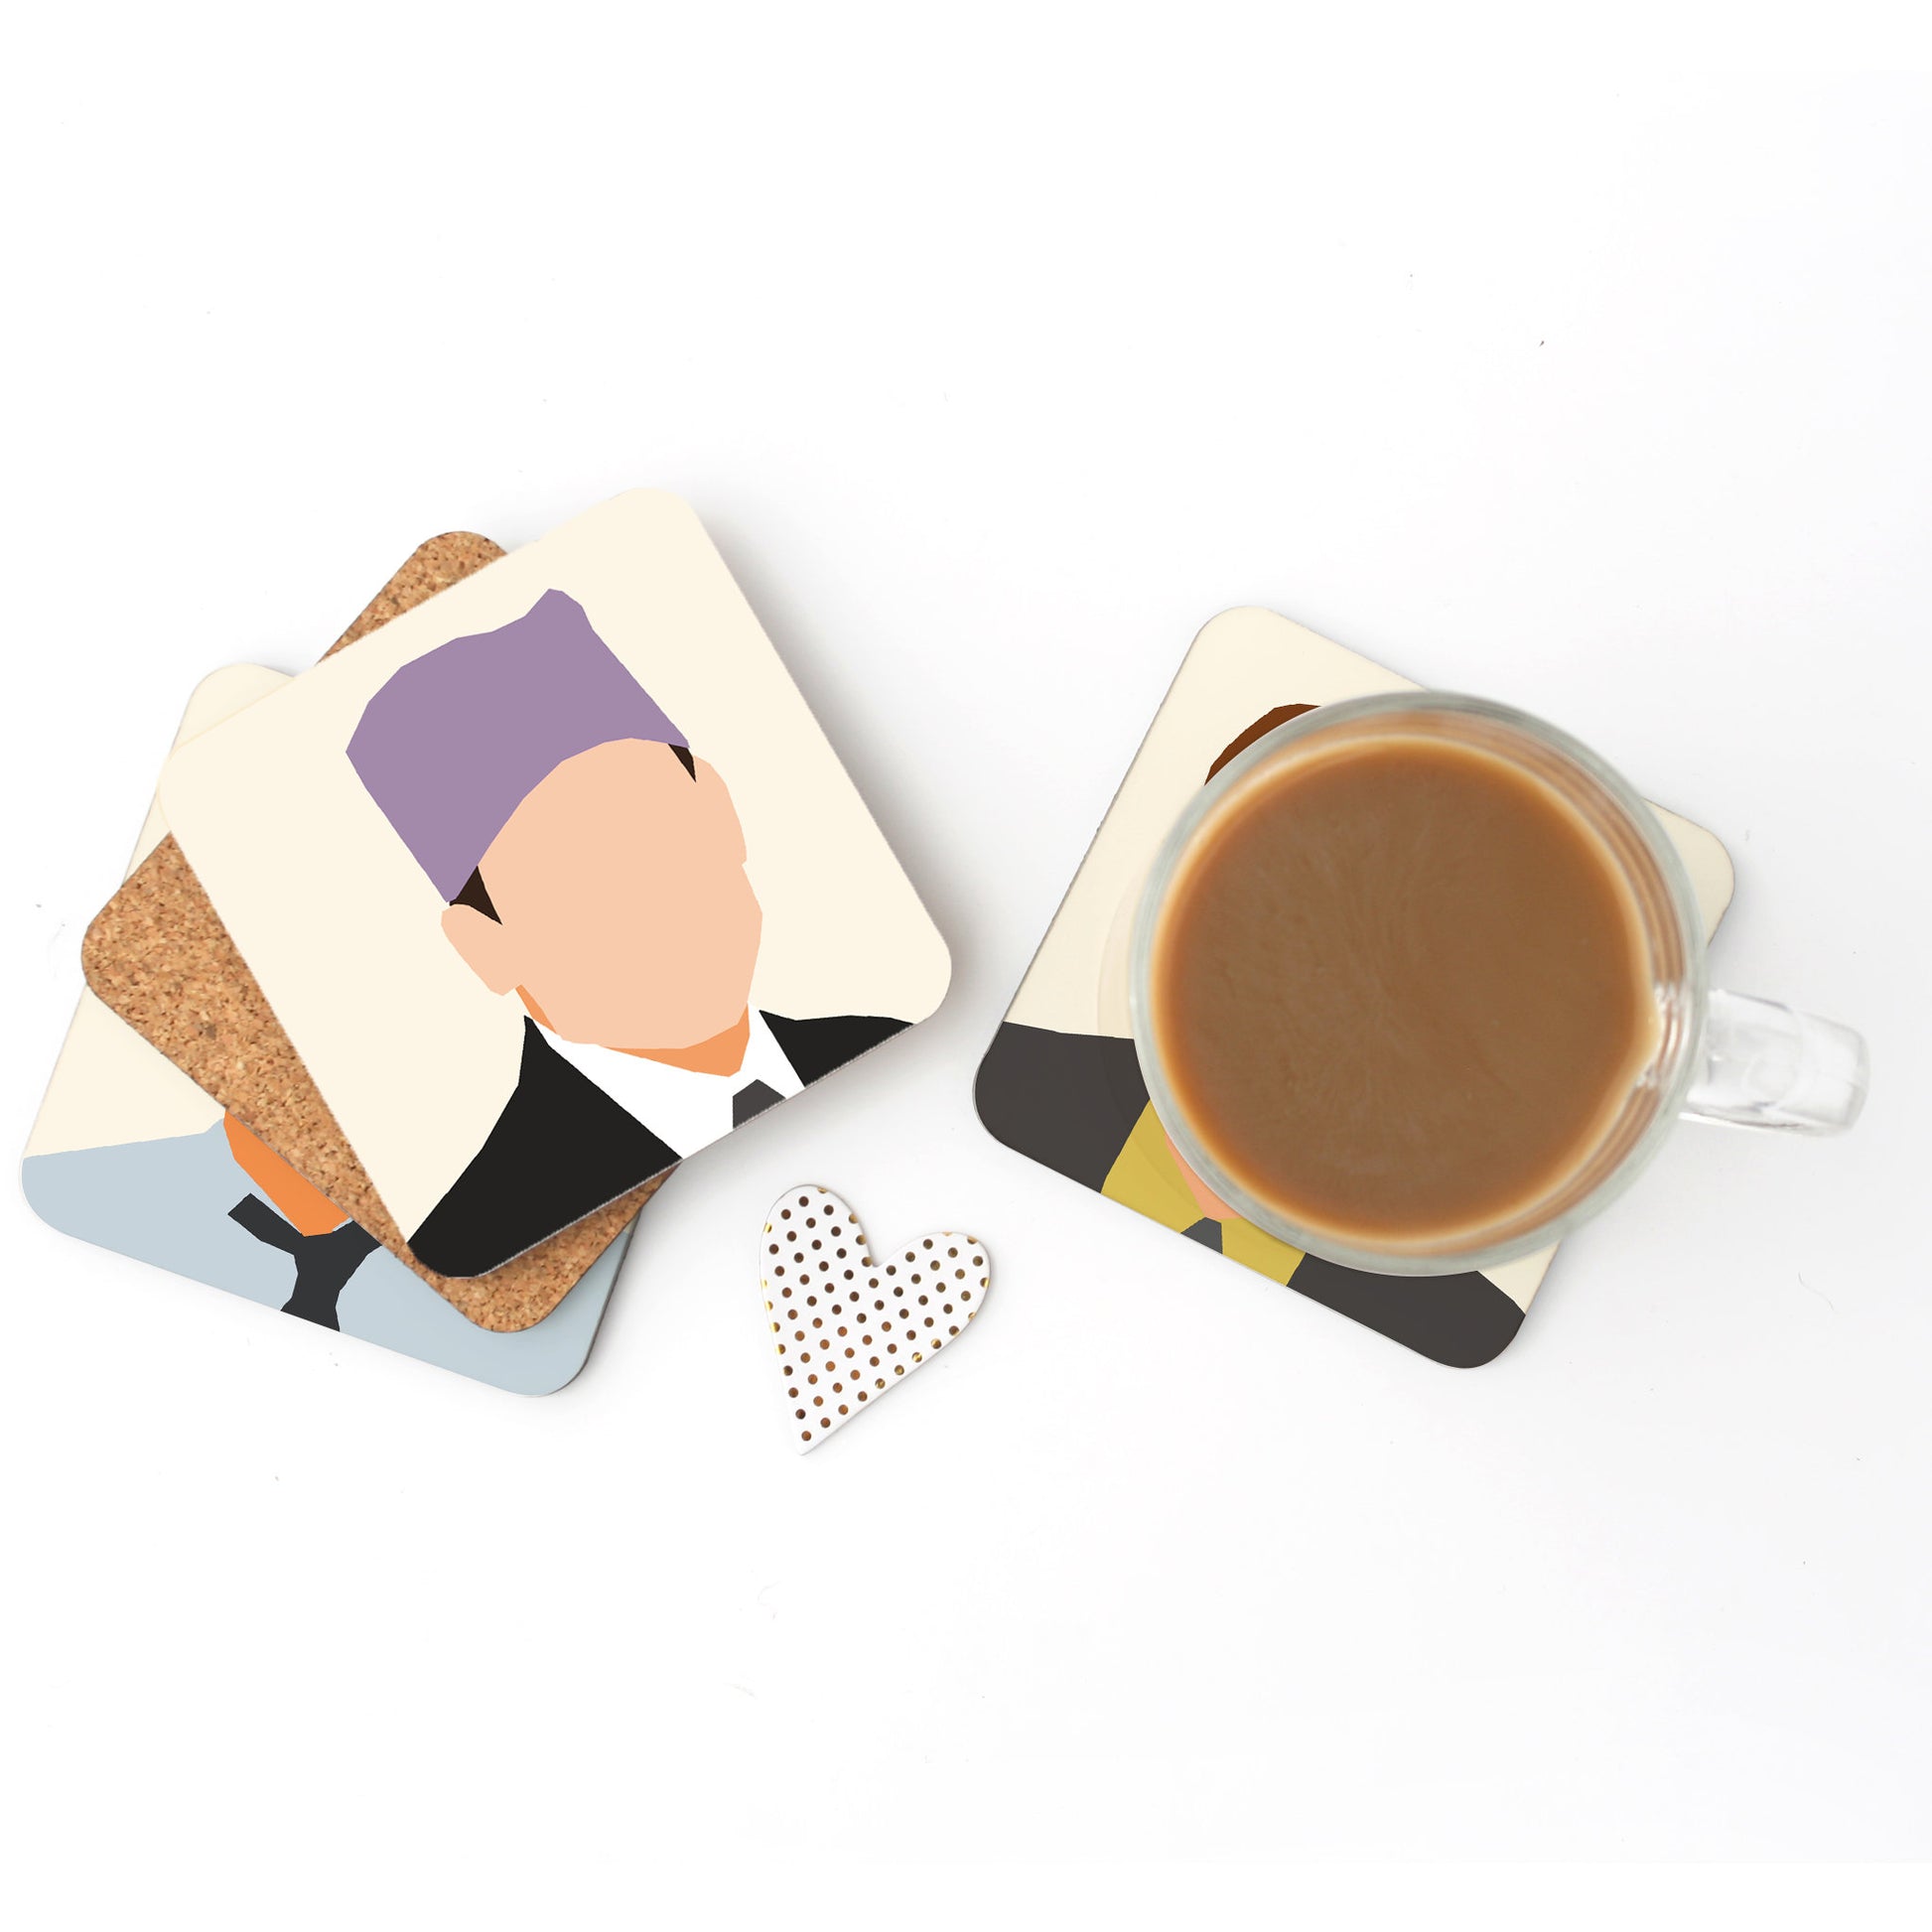 Cork back coasters of The Office tv show cast